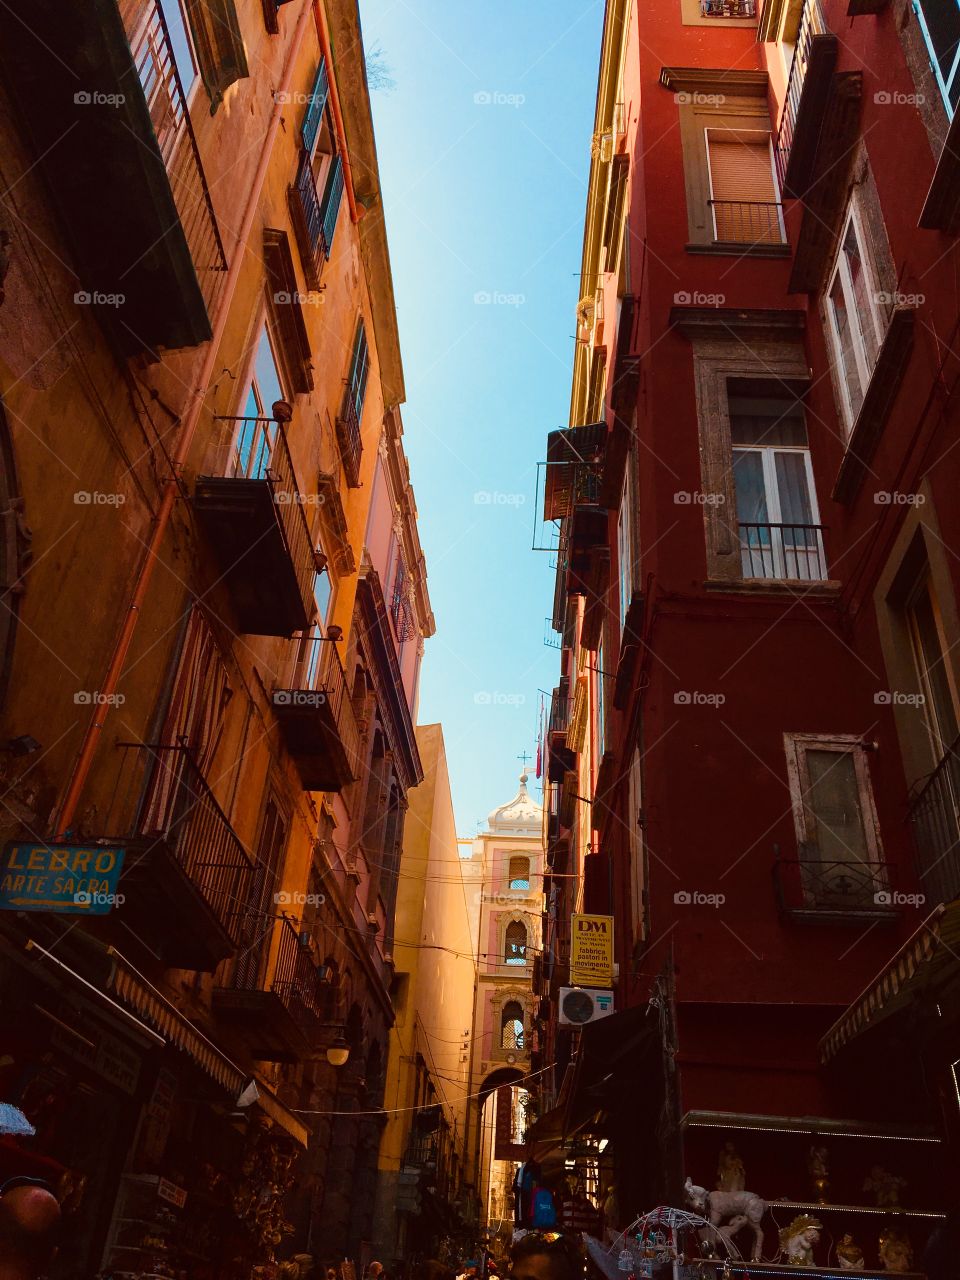 I love Italy! It’s so colorful as shown in this picture. The vibrant colors make the buildings truly pop!